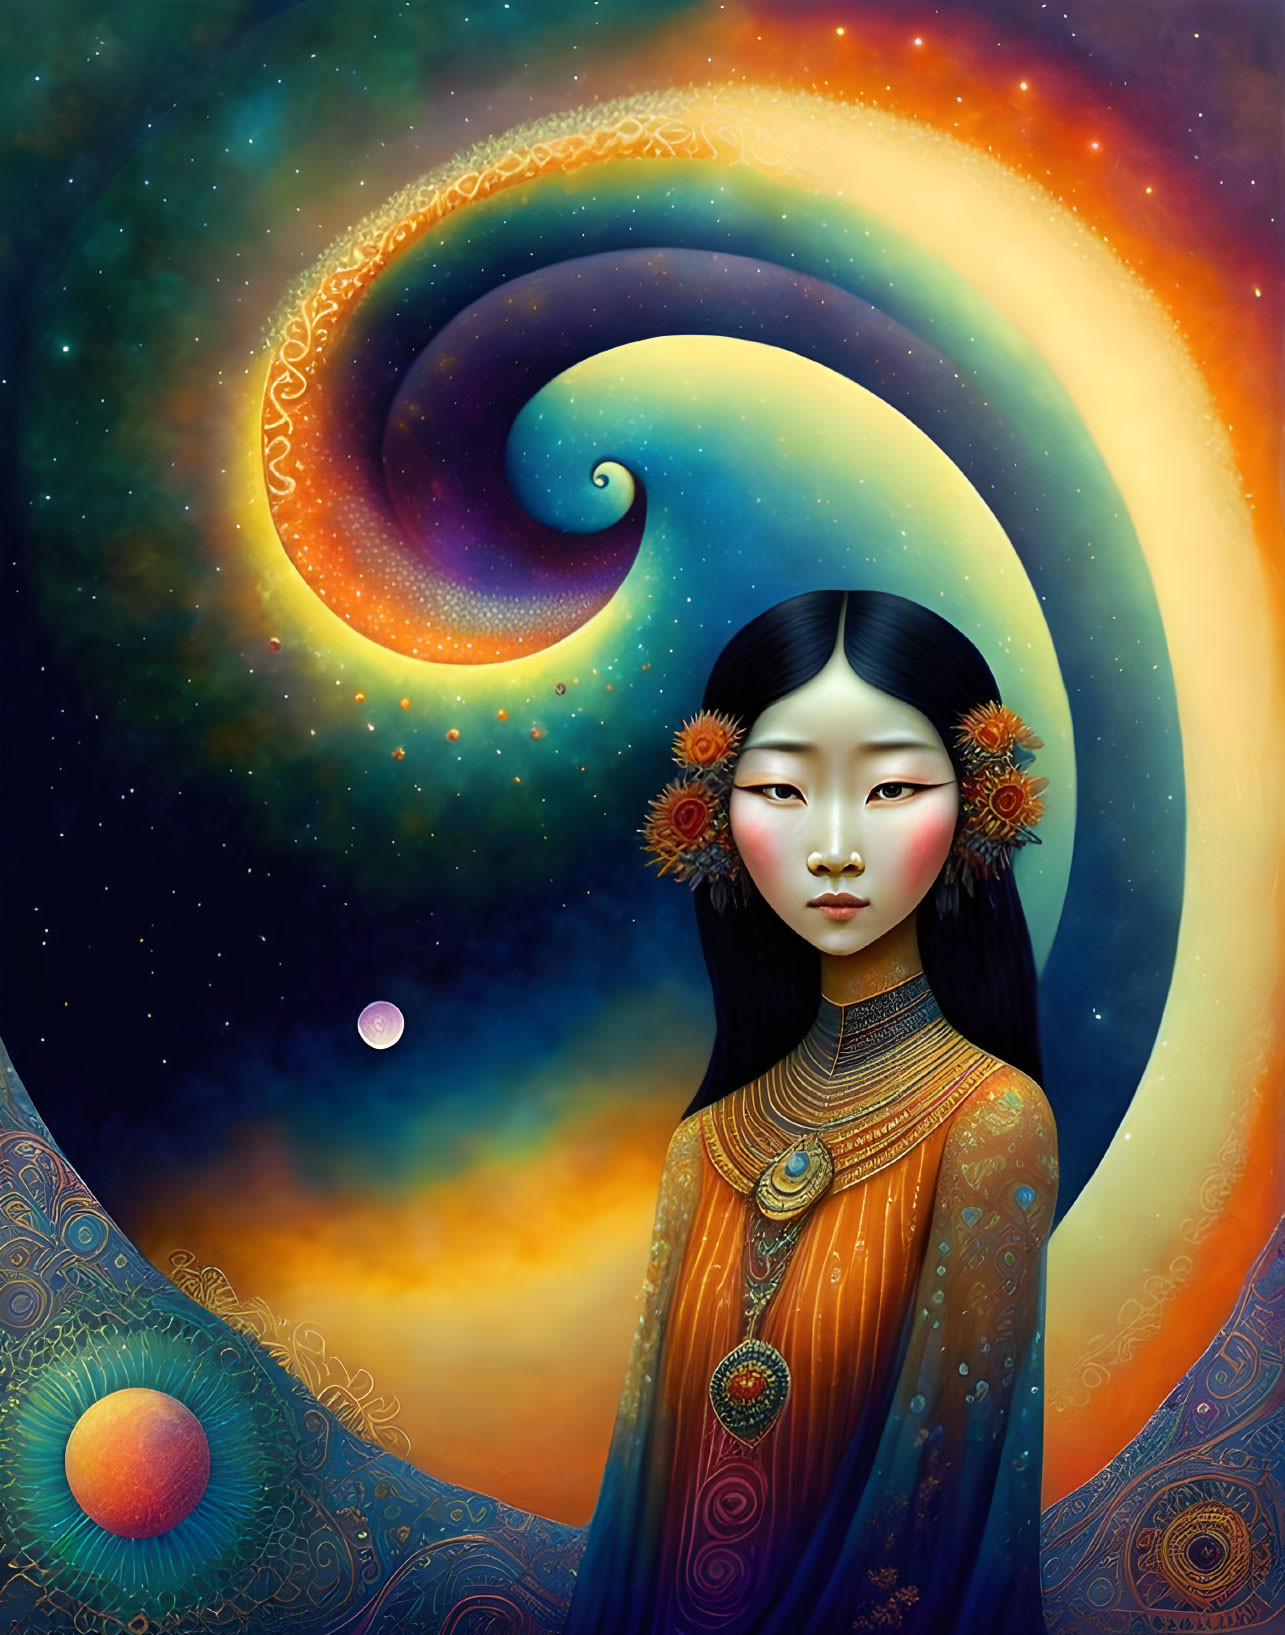 Stylized portrait of a woman with Asian features in cosmic backdrop